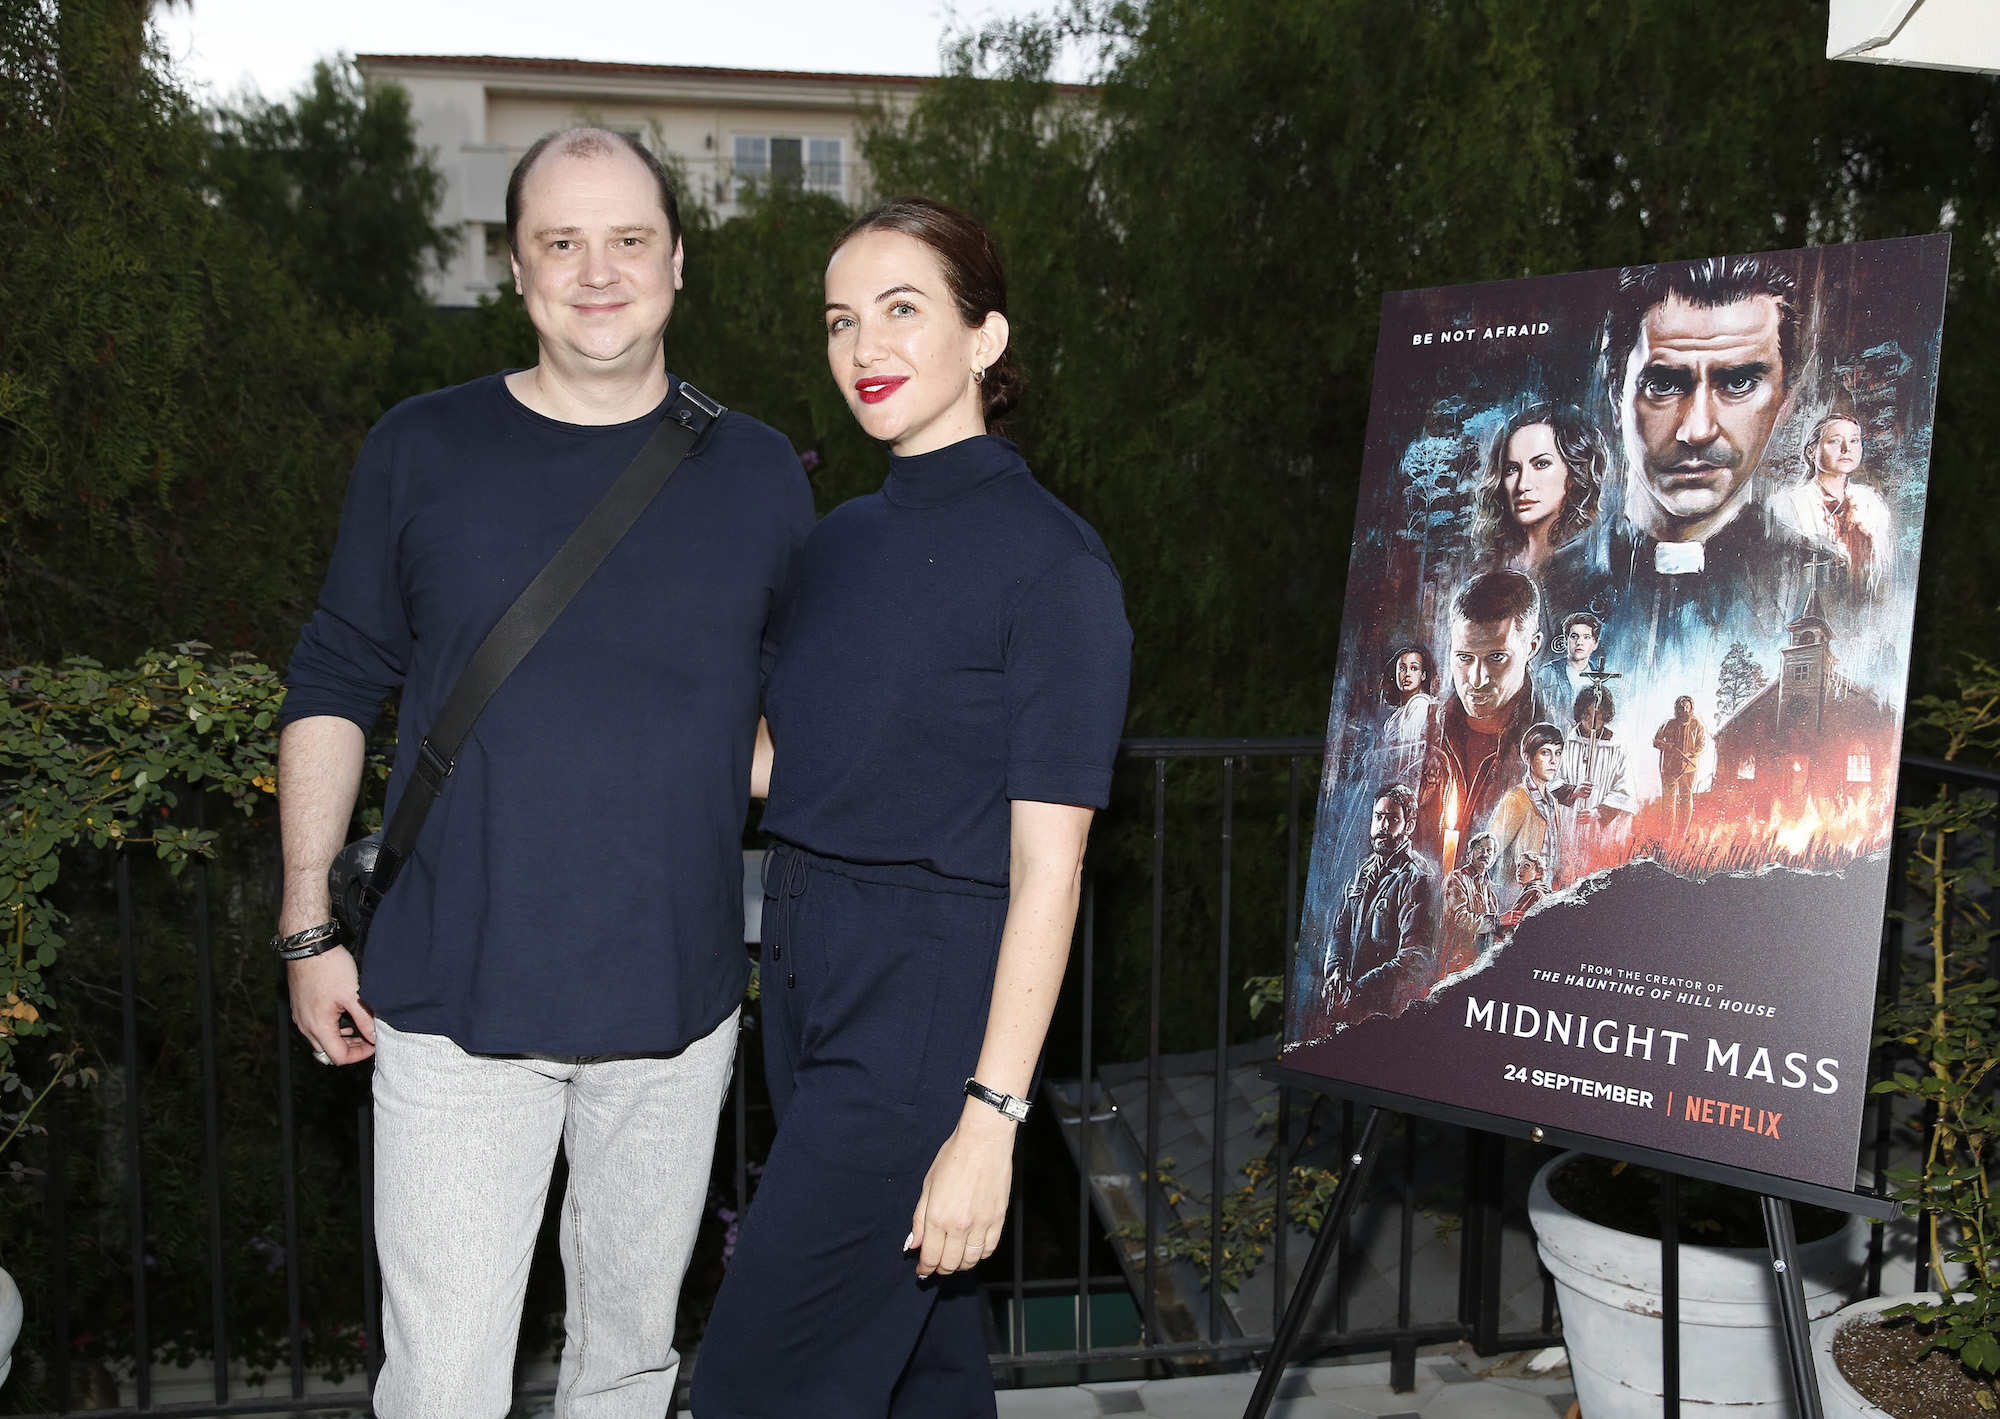 Mike Flanagan with his arm around Kate Siegel at a Midnight Mass screening